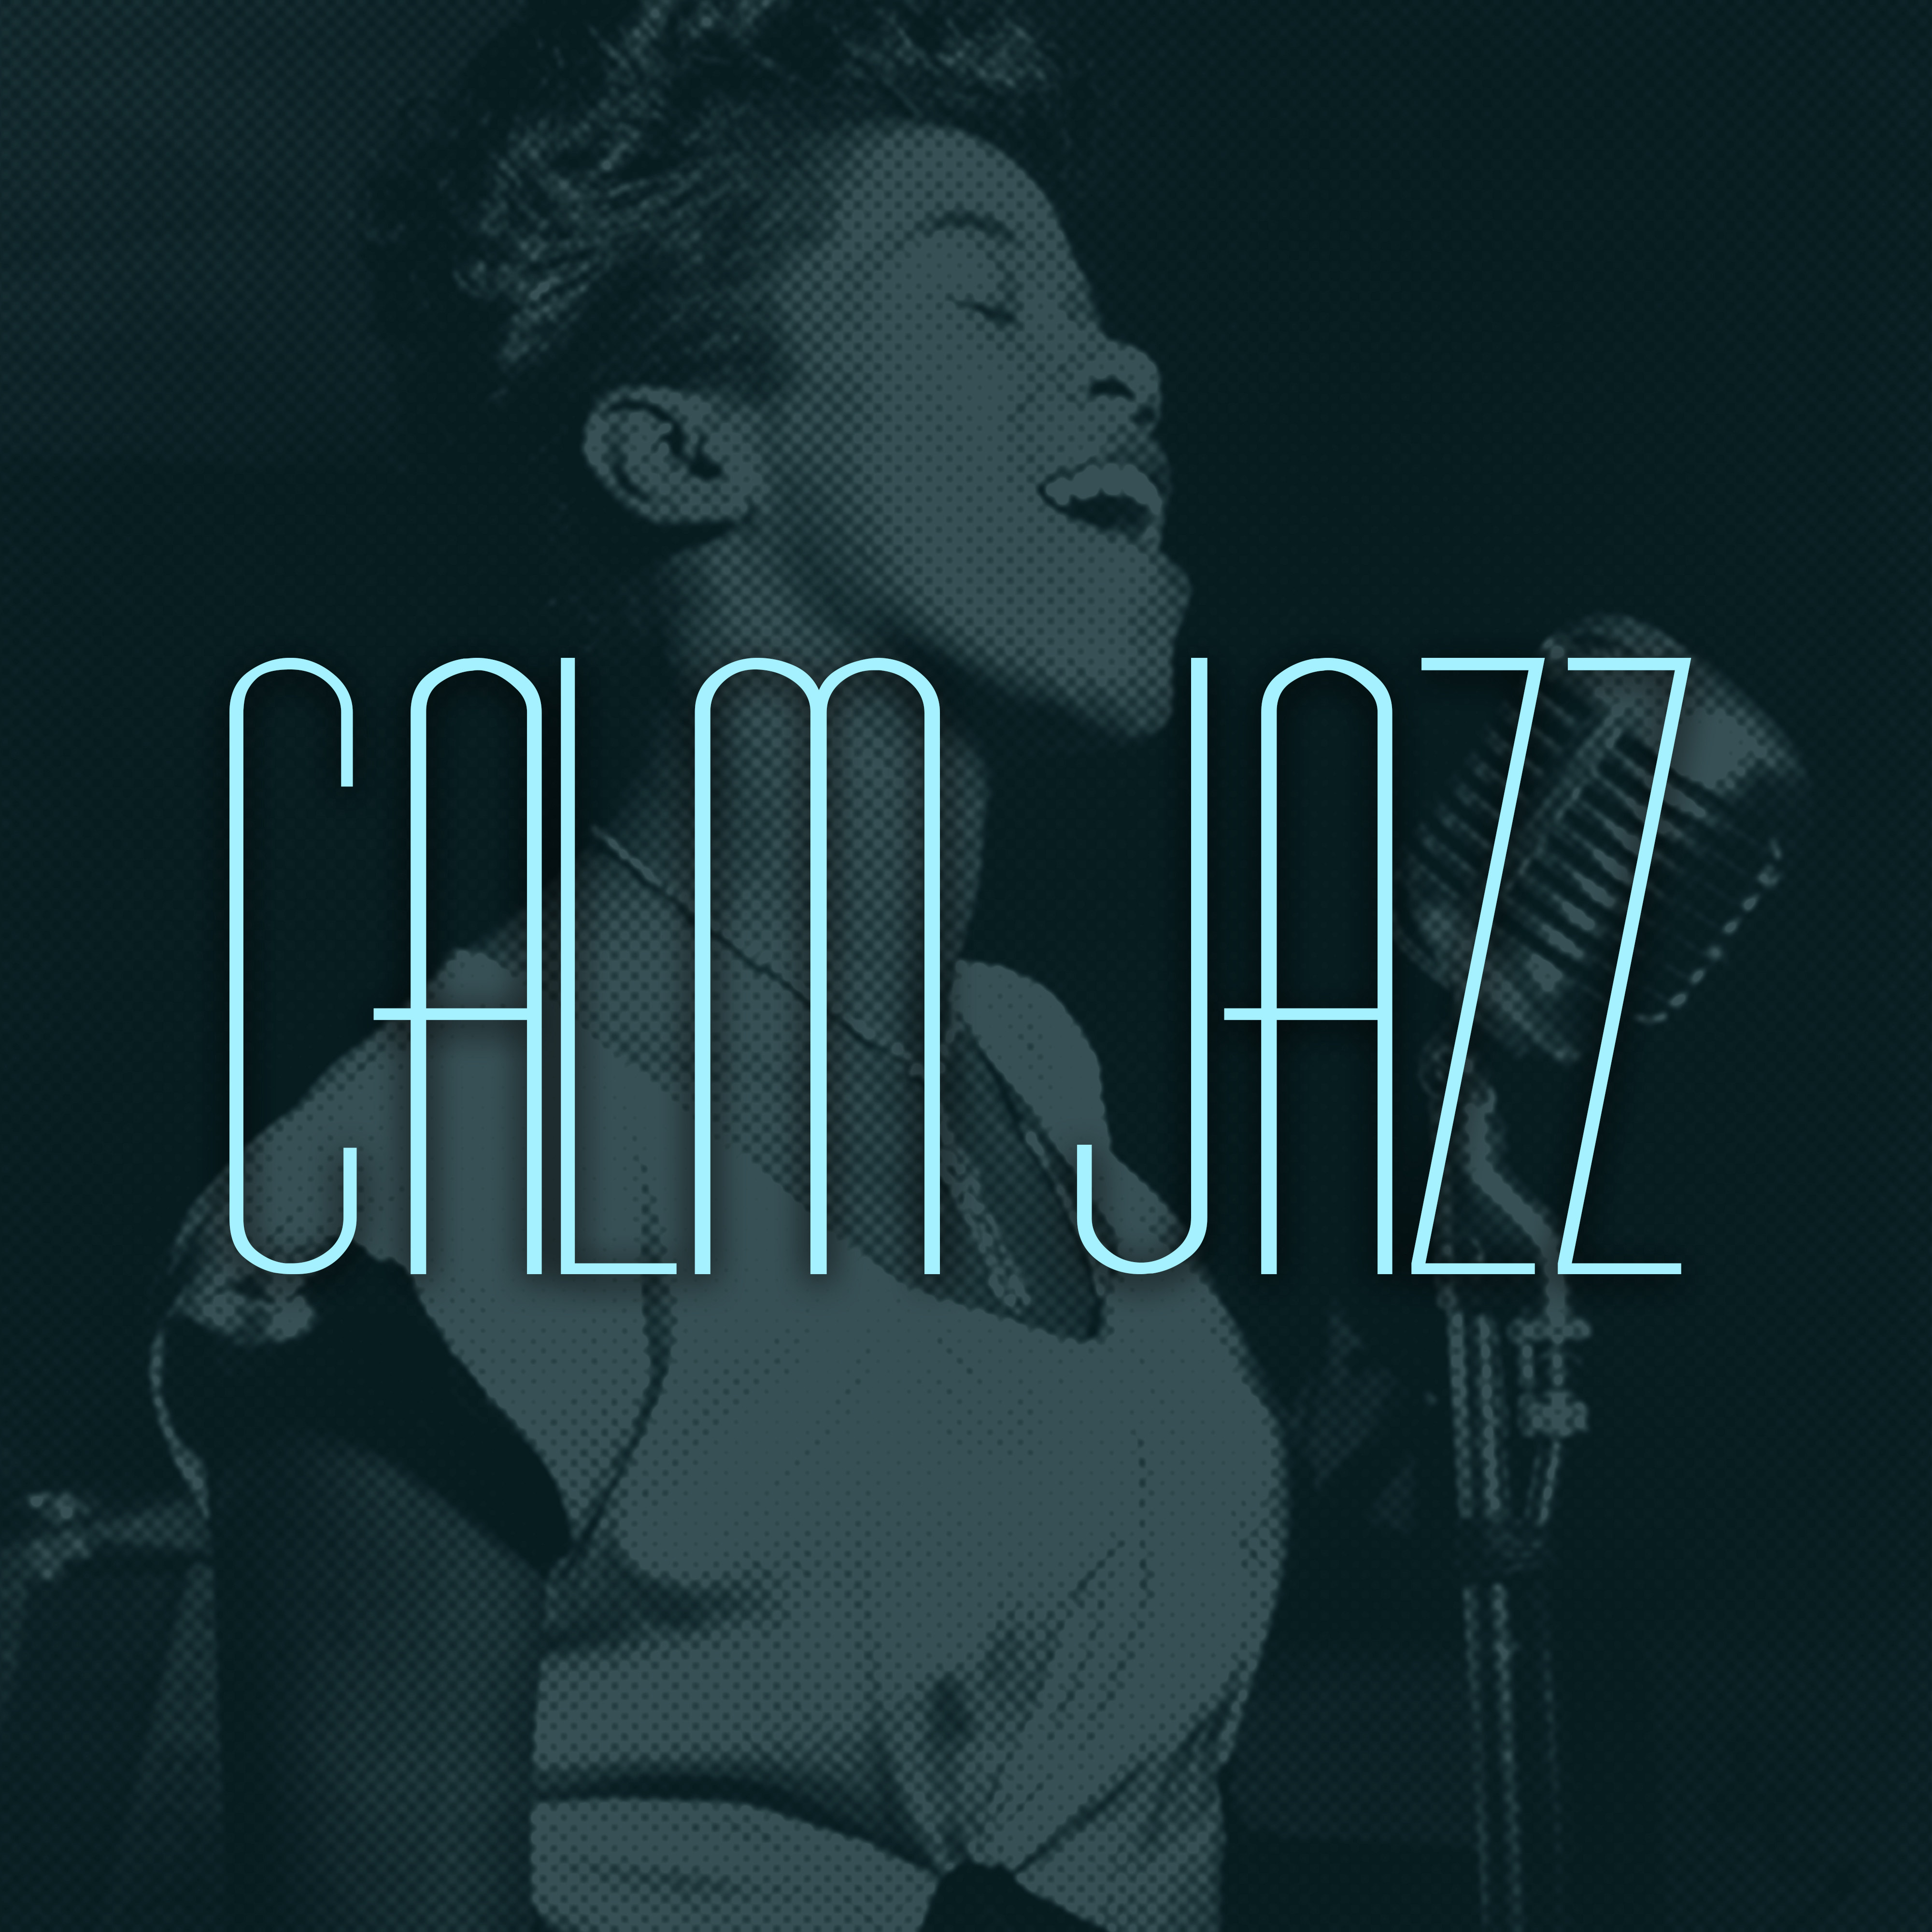 Calm Jazz  Peaceful Piano Session, Music for Restaurant  Cafe, Relaxed Music, Smooth Jazz